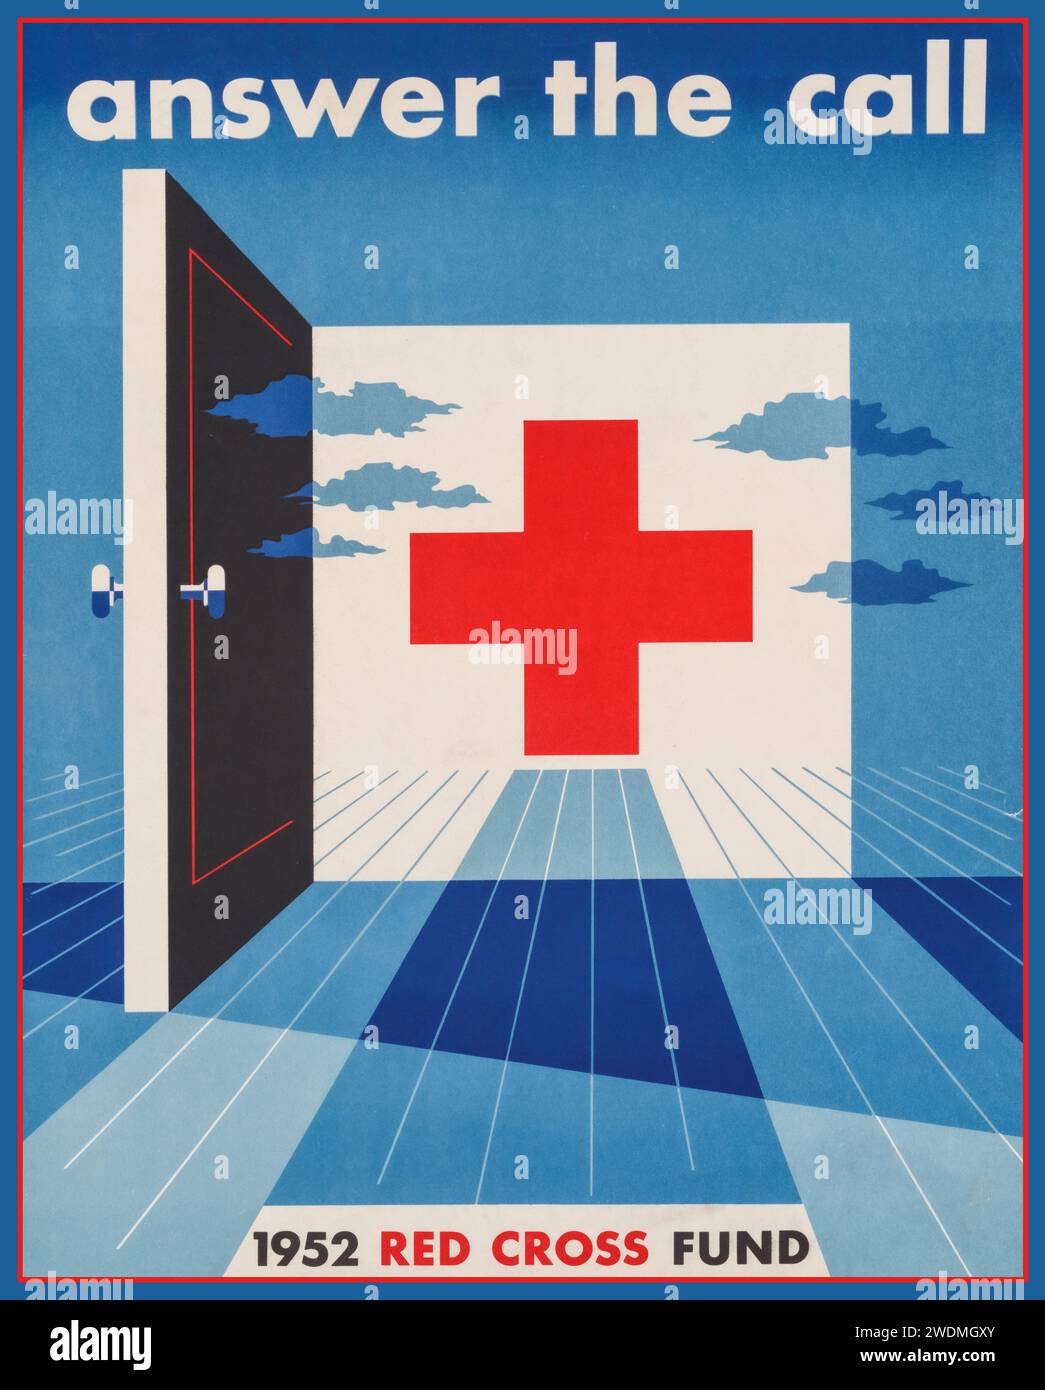 Answer the call: 1952 Red Cross Fund Poster post war propaganda fundraising poster illustration Creator(s): Binder, Joseph, 1898-1972, artist Date Created/Published: [United States] : 1952. Stock Photo